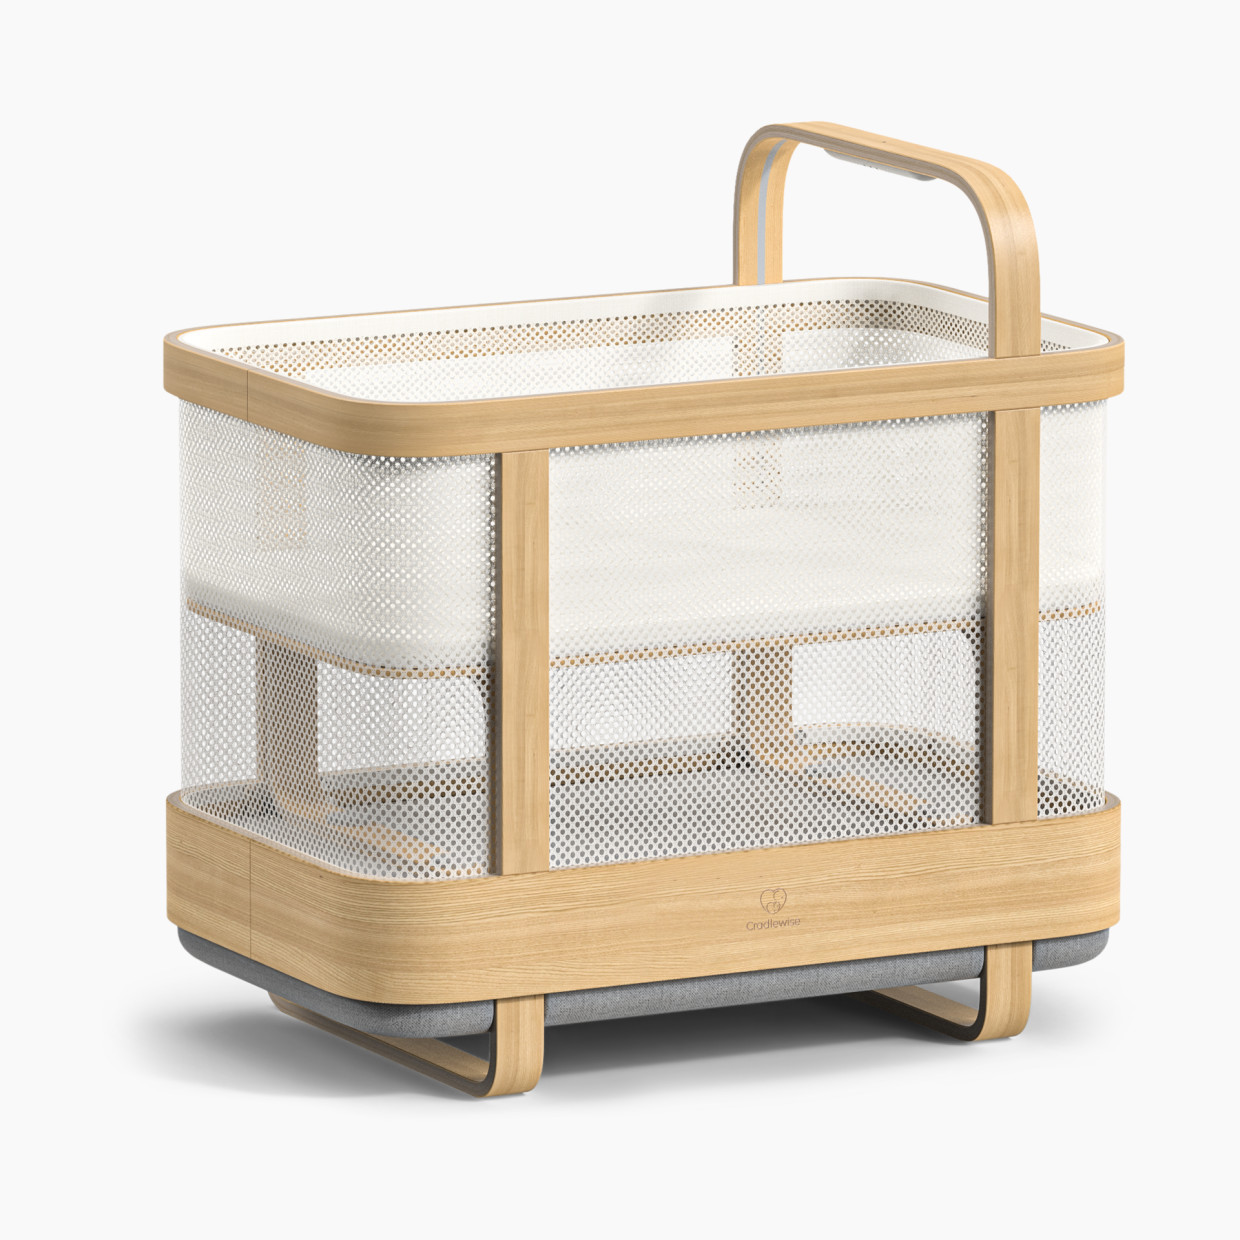 Cradlewise All-In-One Bassinet, Smart Crib, Baby Monitor - Natural, Ships Immediately.